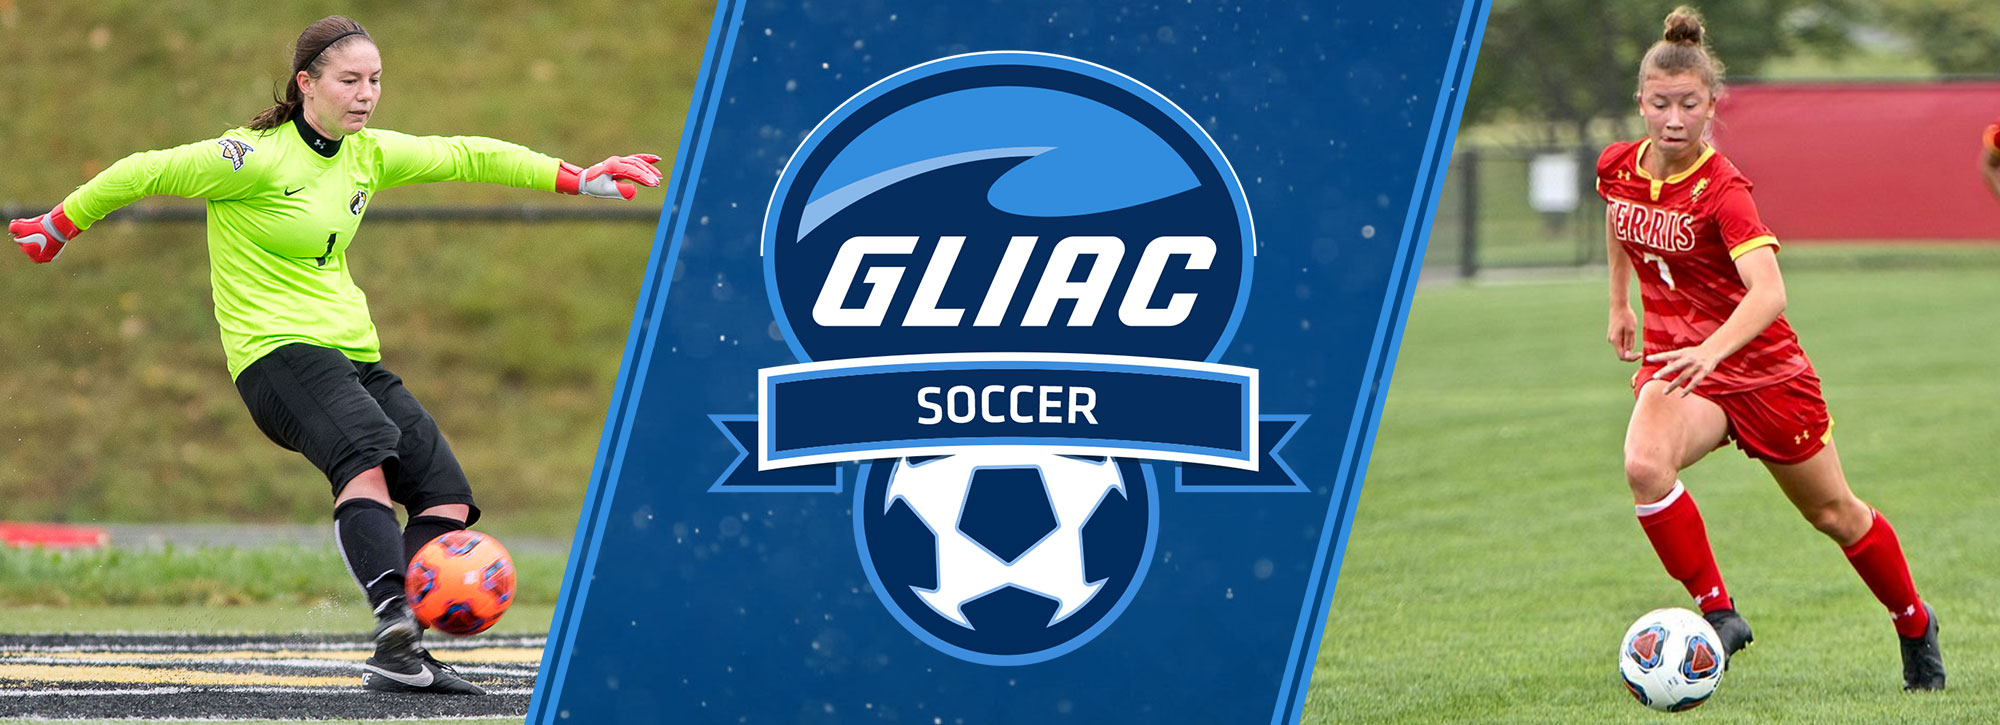 Michigan Tech's Young, Ferris State's Nagel Selected GLIAC Women's Soccer Players of the Week